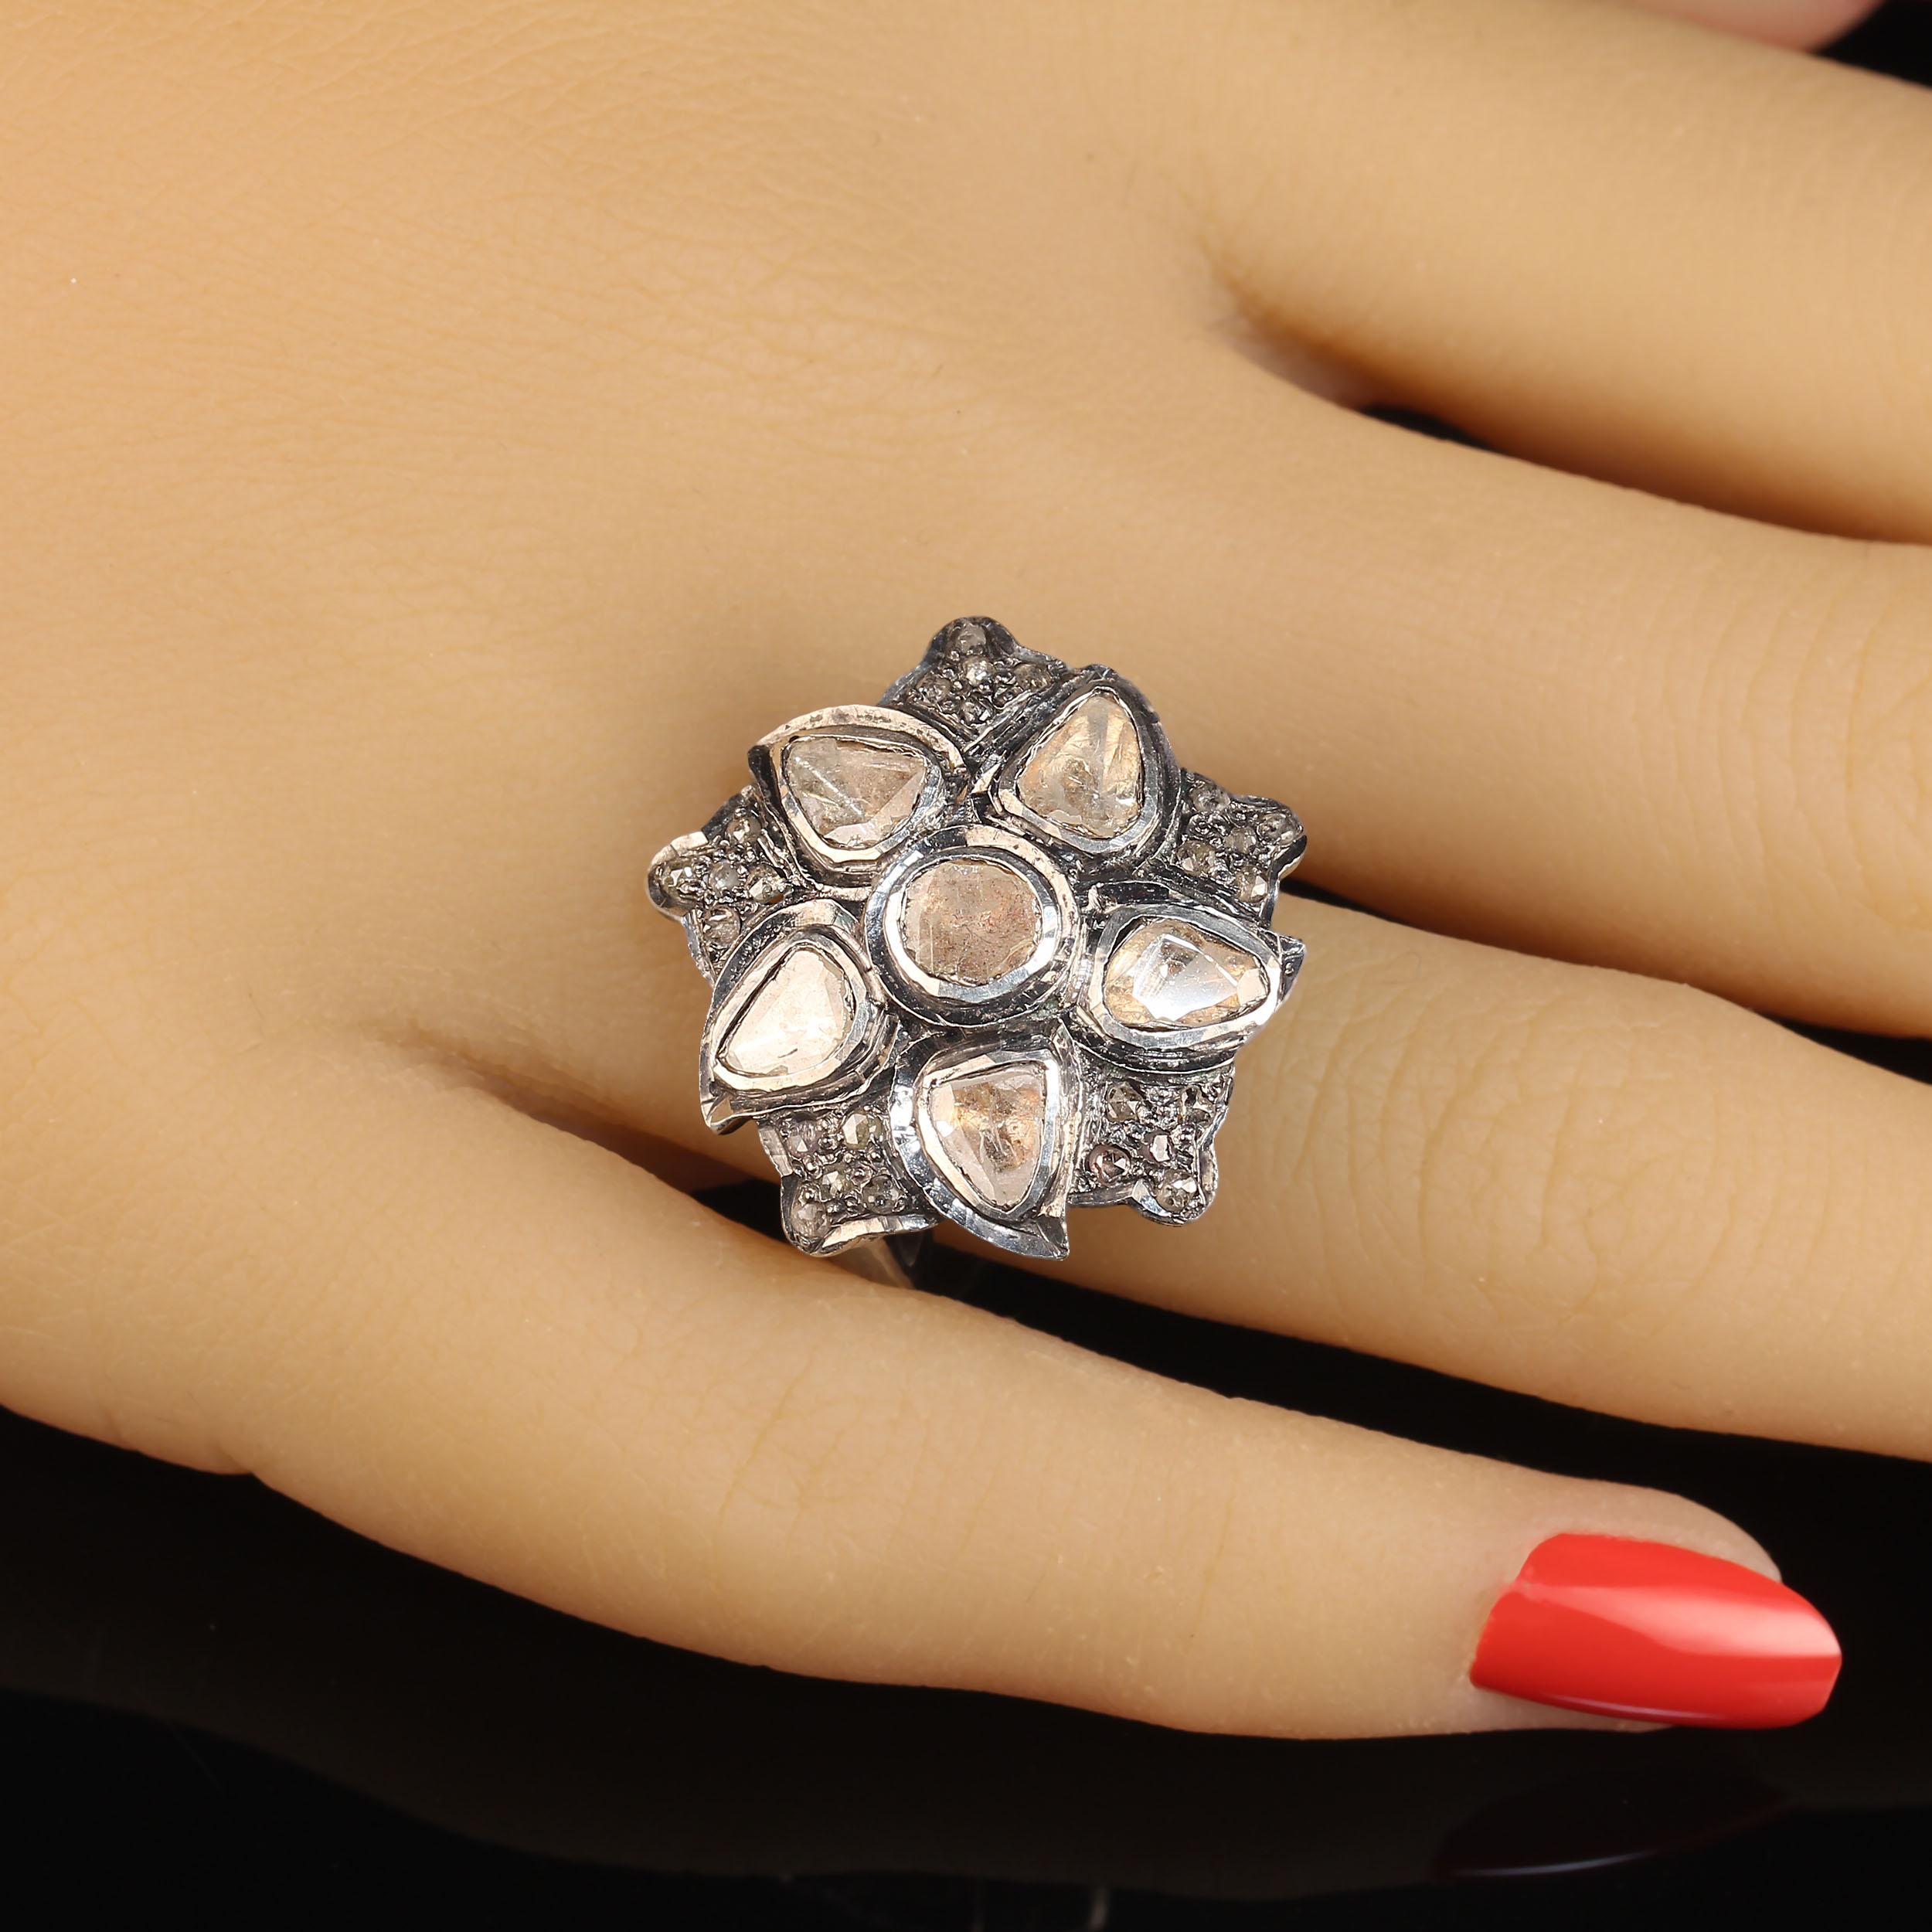 Elegant flower design of diamond slices and chips on antiqued sterling silver.  This beauty is 23 x23 MM wide and a size 7.  No changes by seller.